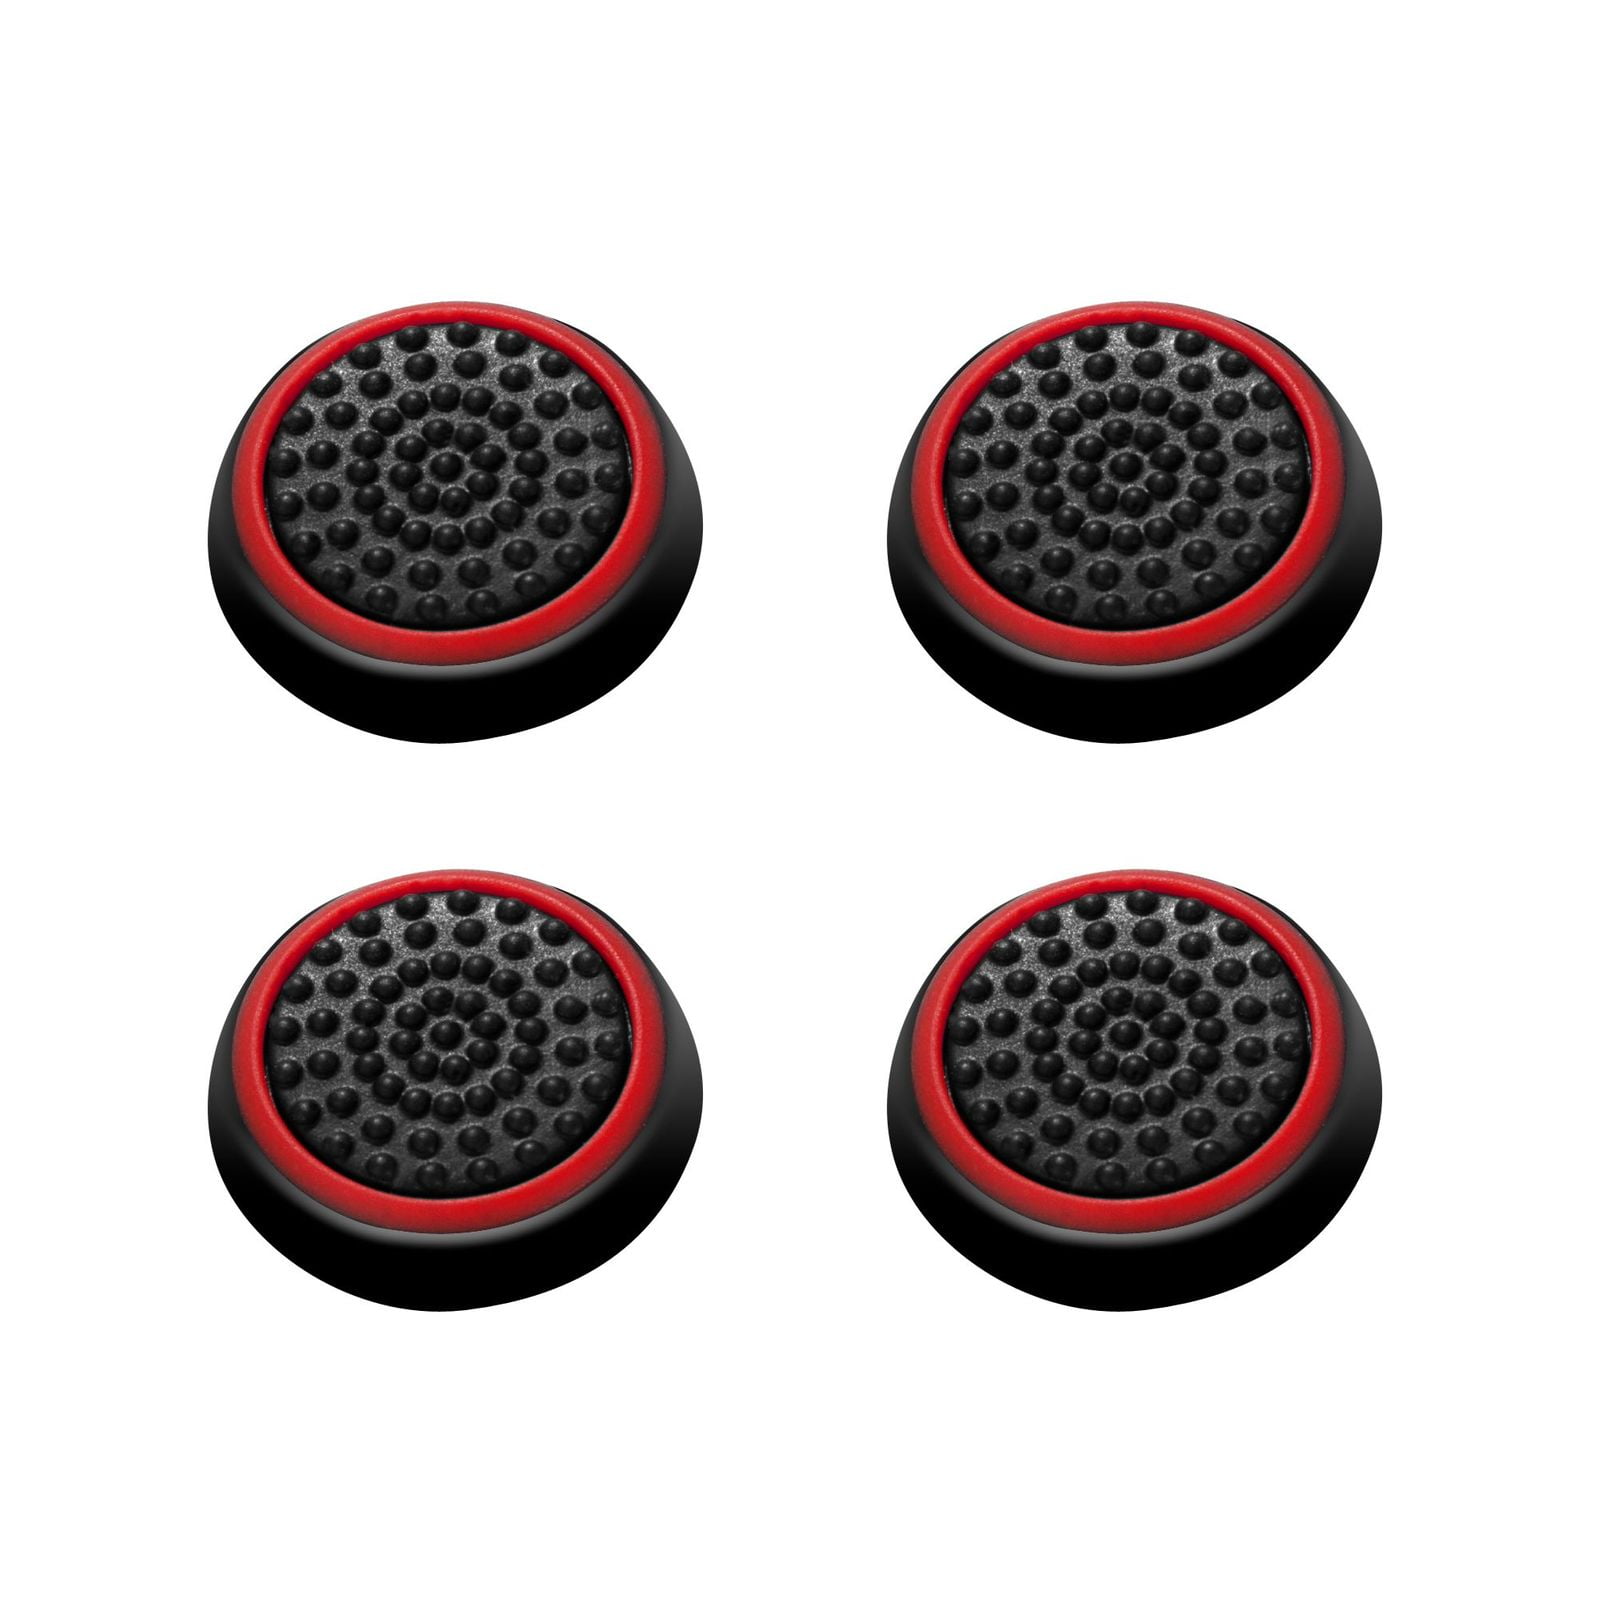 gebed Belichamen Boven hoofd en schouder 4pcs Thumb Grips for PS4 Controller Xbox One Xbox 360 Black/Red Silicone  Caps Analog by Insten for Sony PlayStation 2 3 4 Controller - Walmart.com